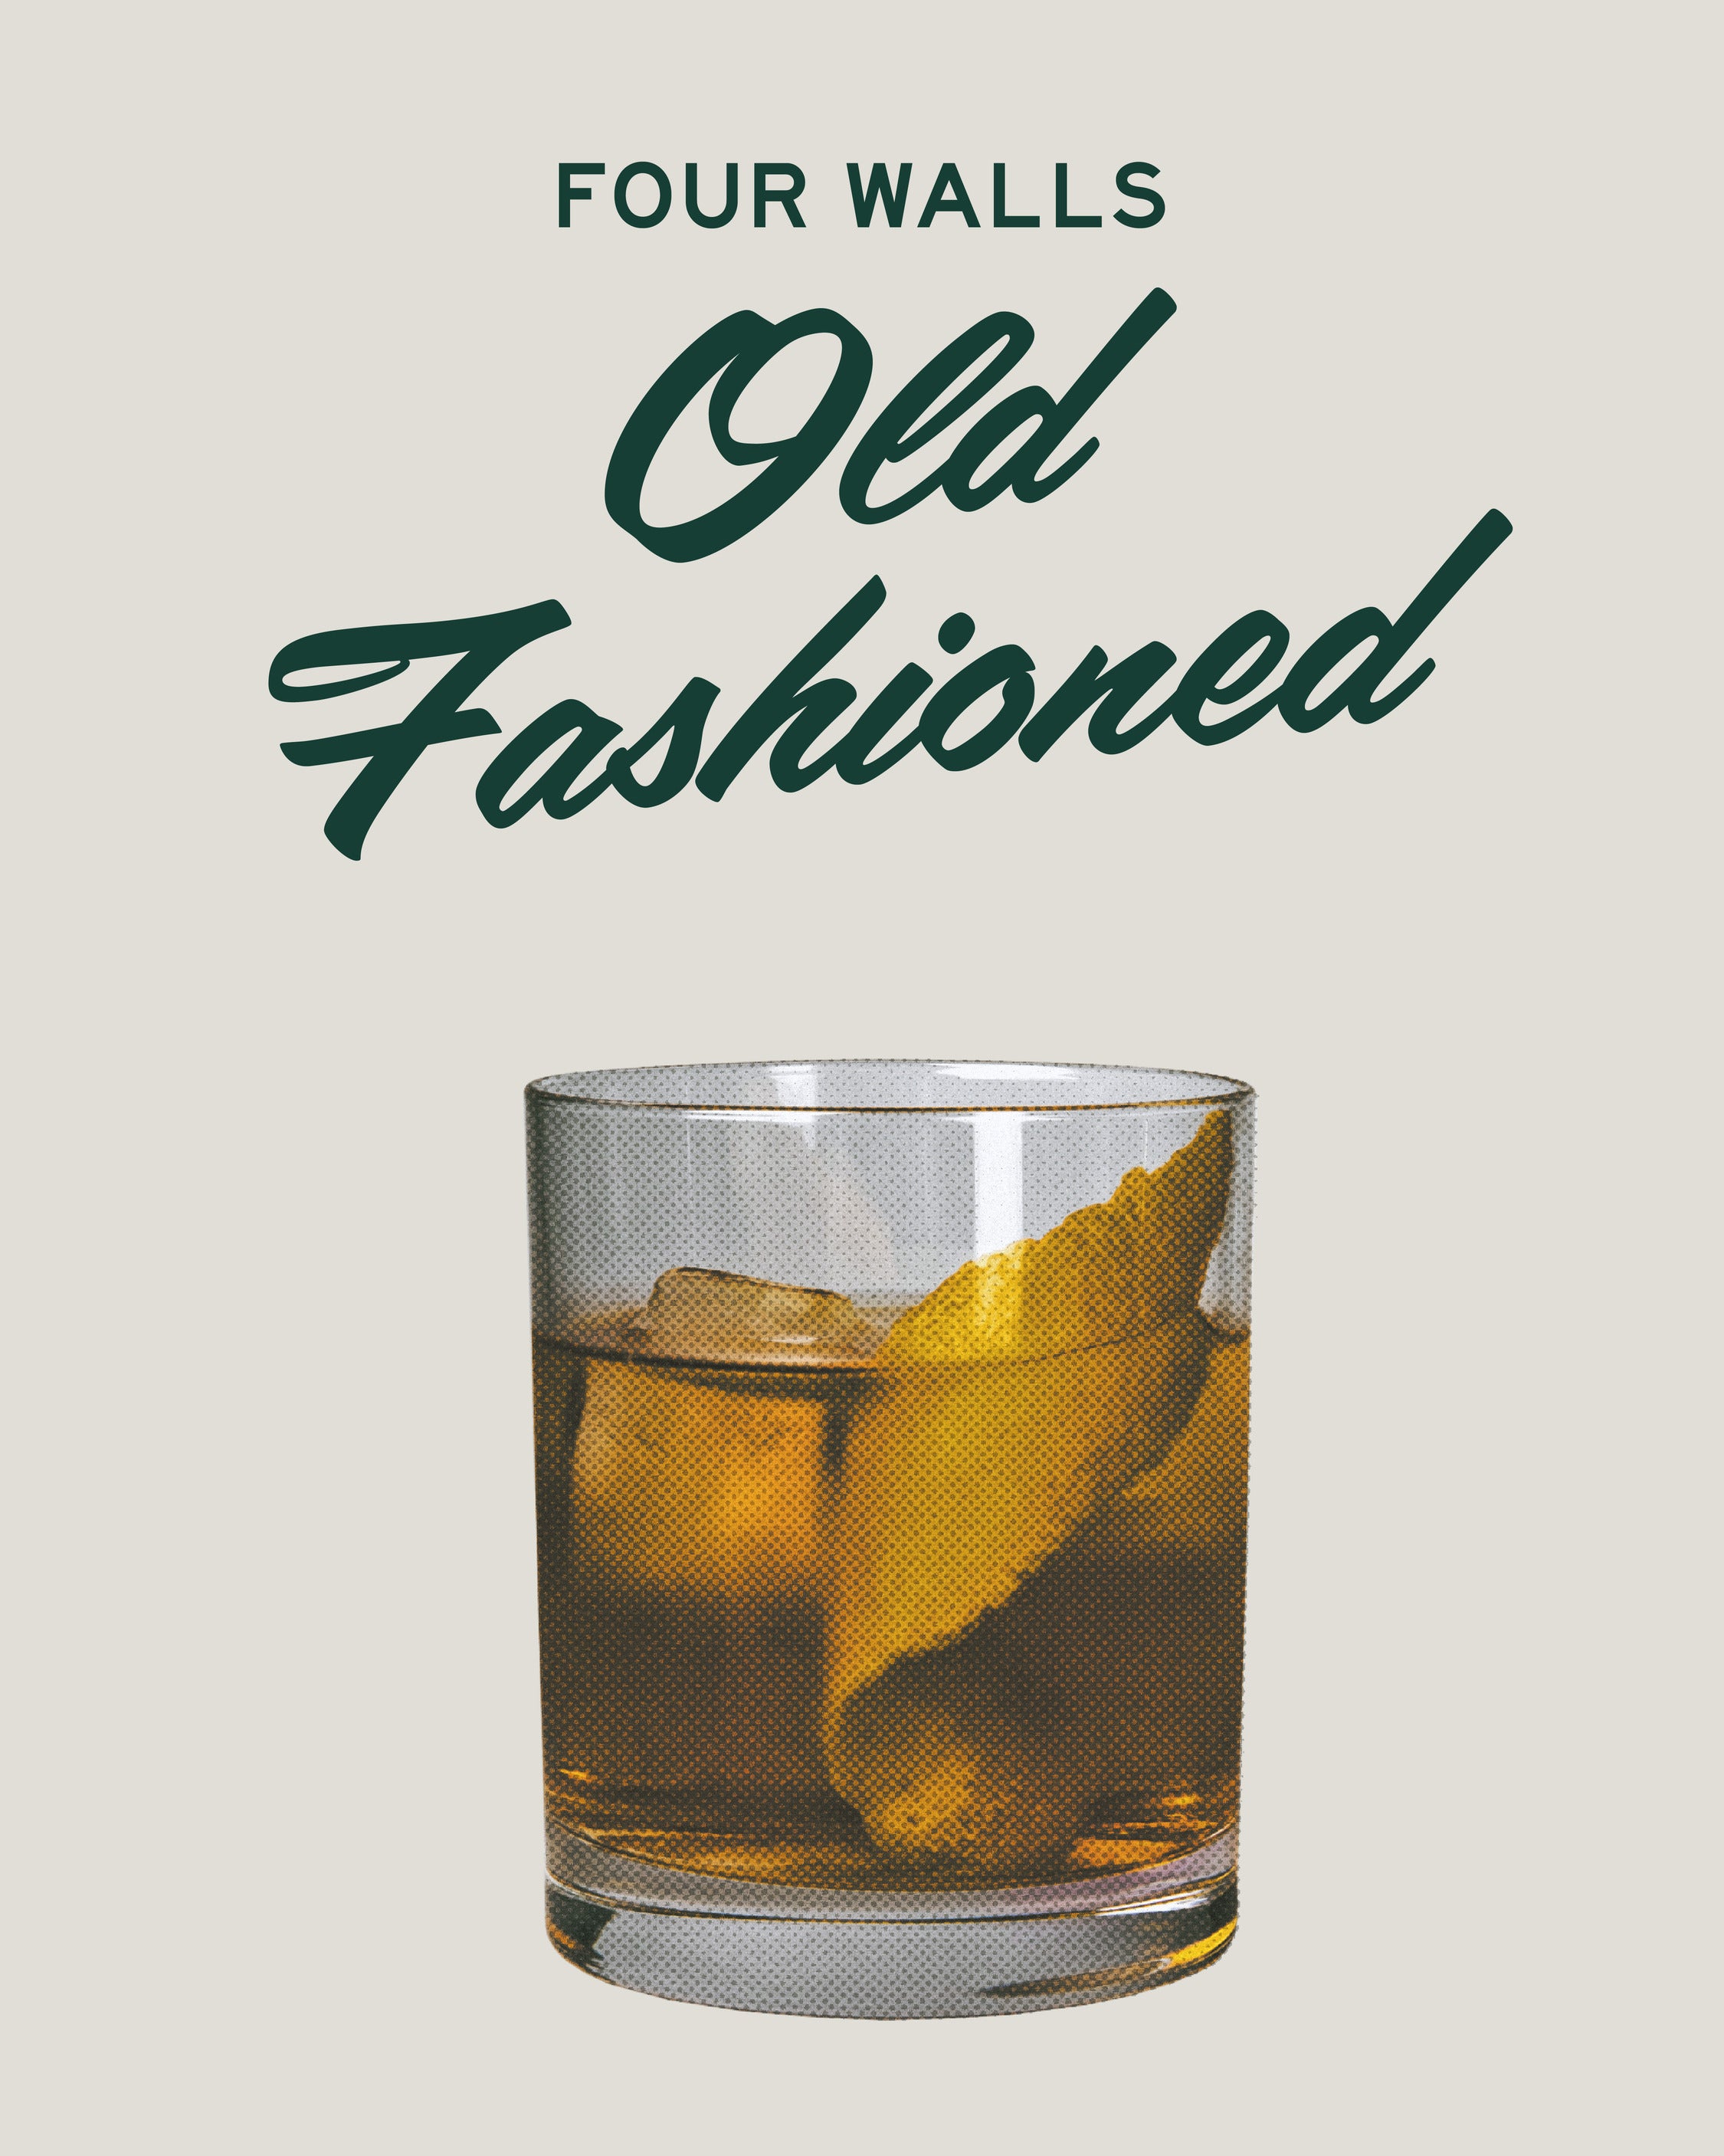 FW-cocktails_old_fashioned_1.jpg